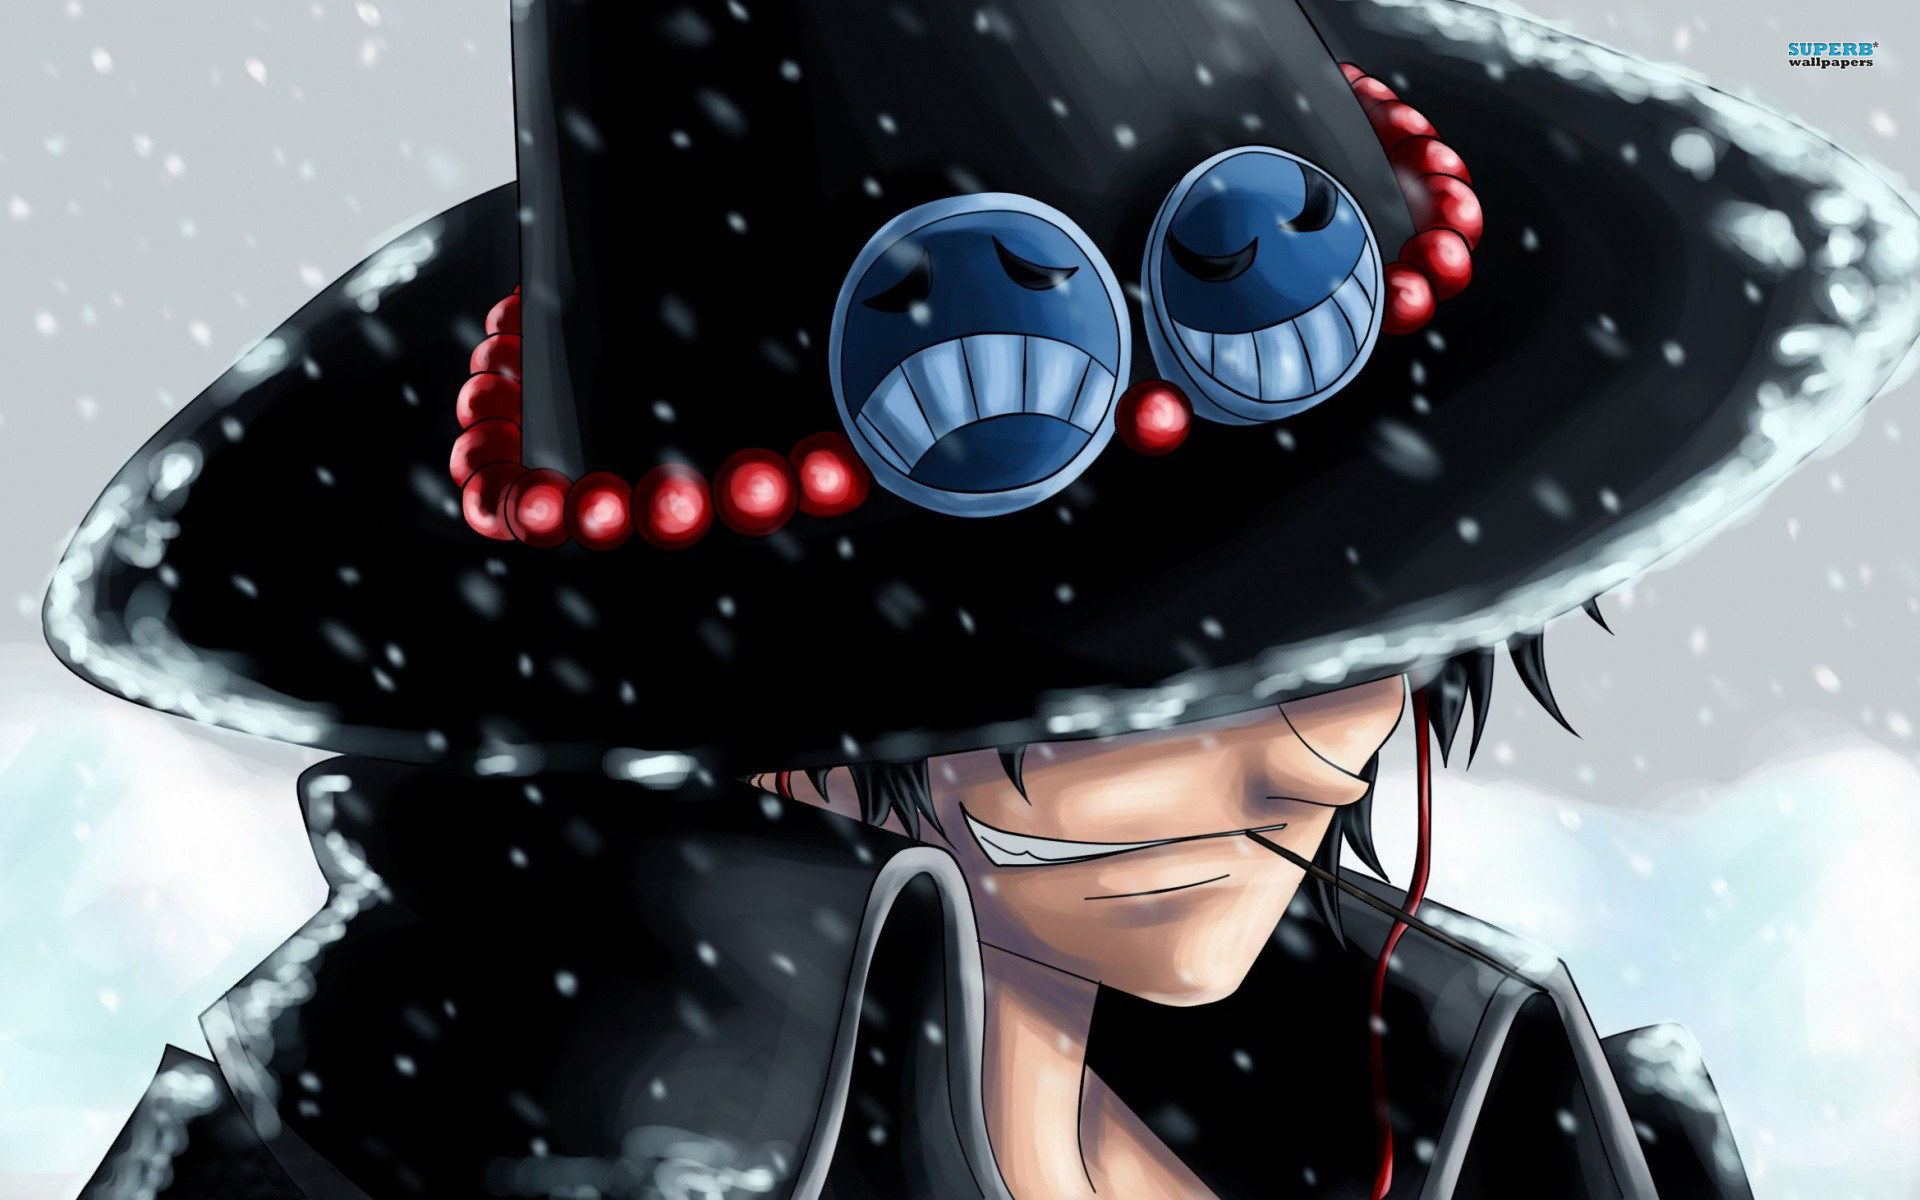 One Piece Wallpapers Downloads A21 - Free cool beautiful 3d manga anime desktop mobile phone Backgrounds wallpapers downloads